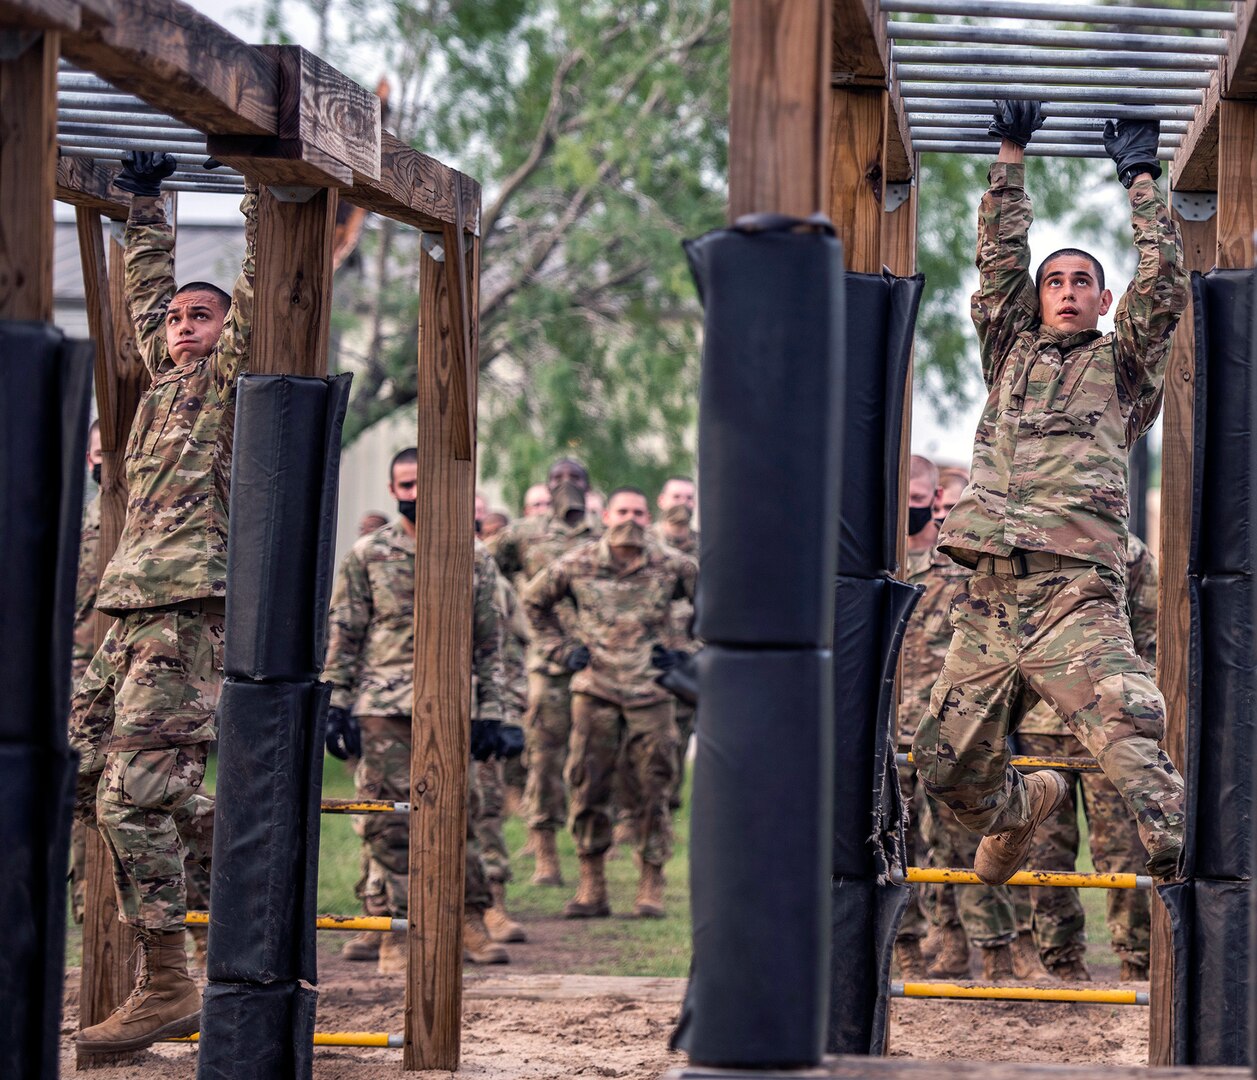 Nicolas (left) and his brother Daniel (right) Hughes, U.S. Air Force basic training trainee, run through an obstacle course May 21 at Joint Base San Antonio-Chapman Annex.